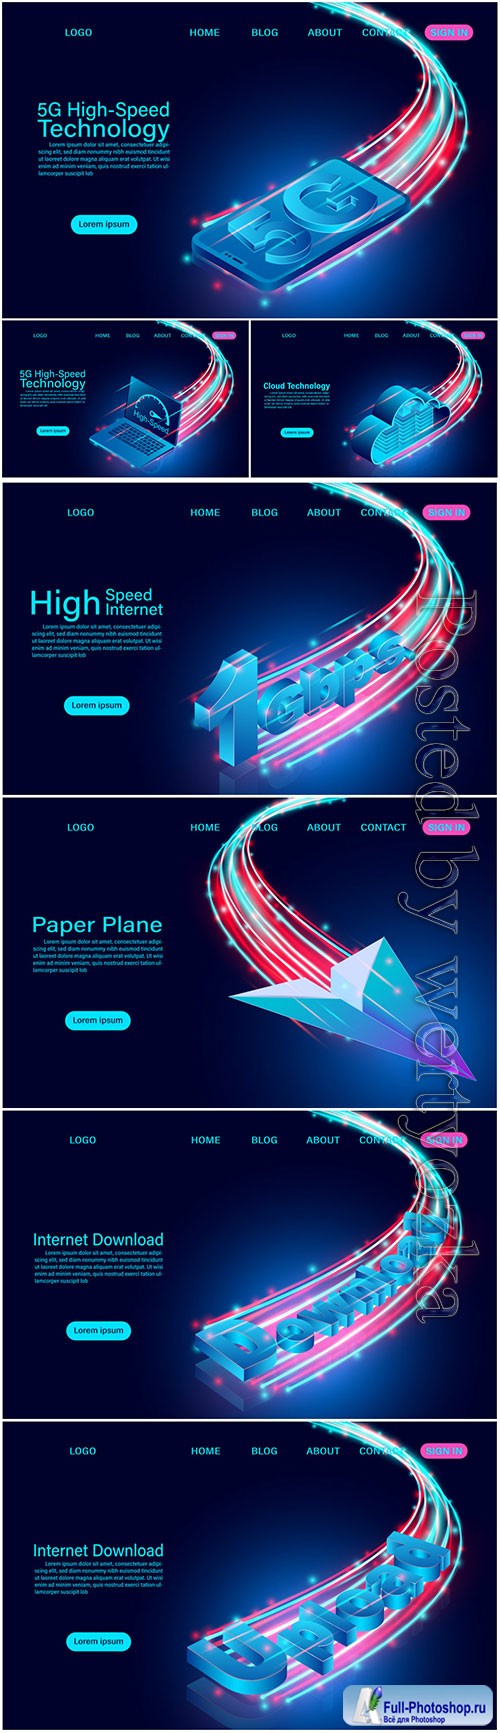 Banner with Internet concept isometric illustration